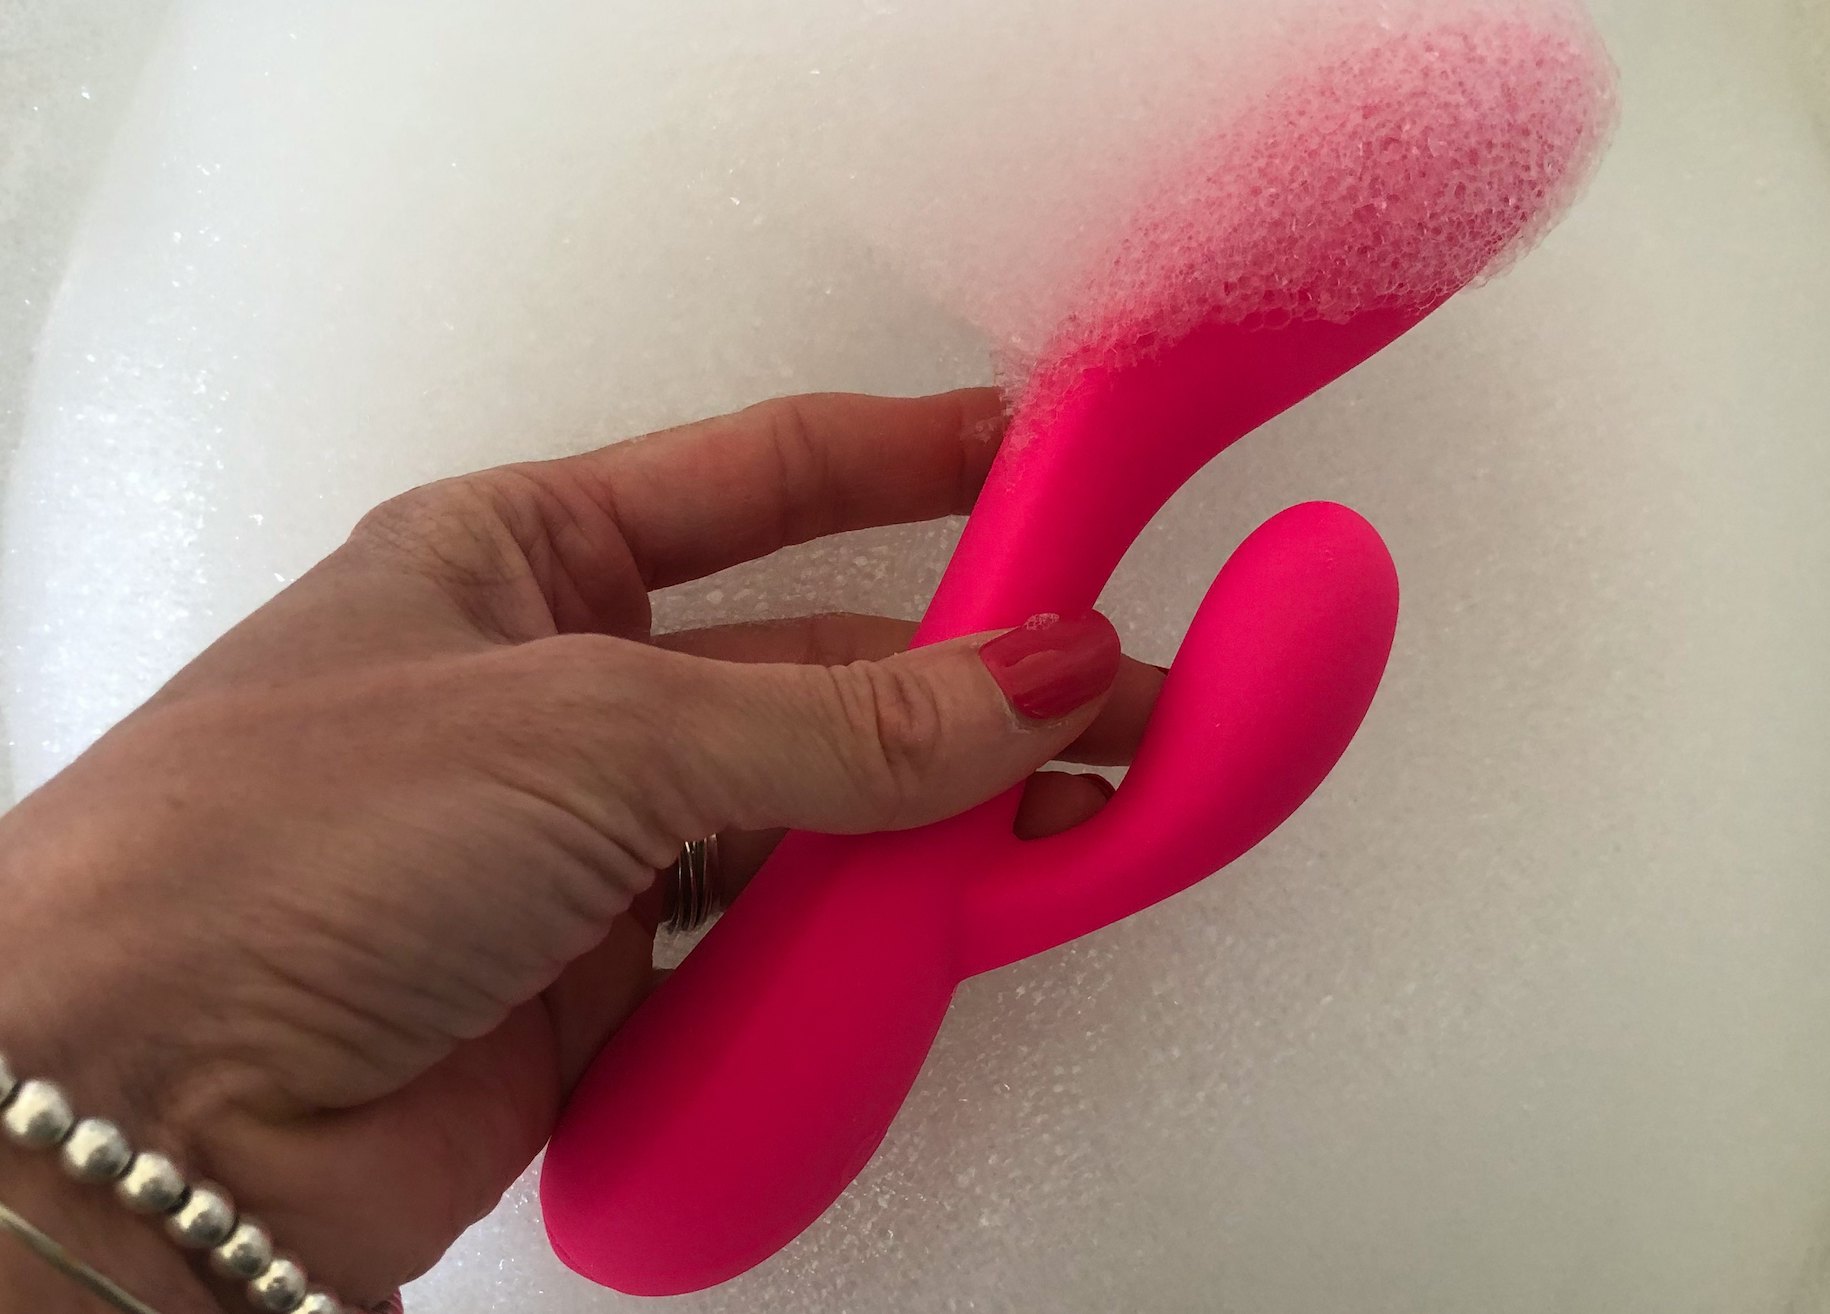 Amazoncom plusOne Vibrating Cock Ring  Penis Ring Made of BodySafe  Silicone Fully Waterproof USB Rechargeable  Cock Ring Vibrator with 5  Vibration Settings  Everything Else